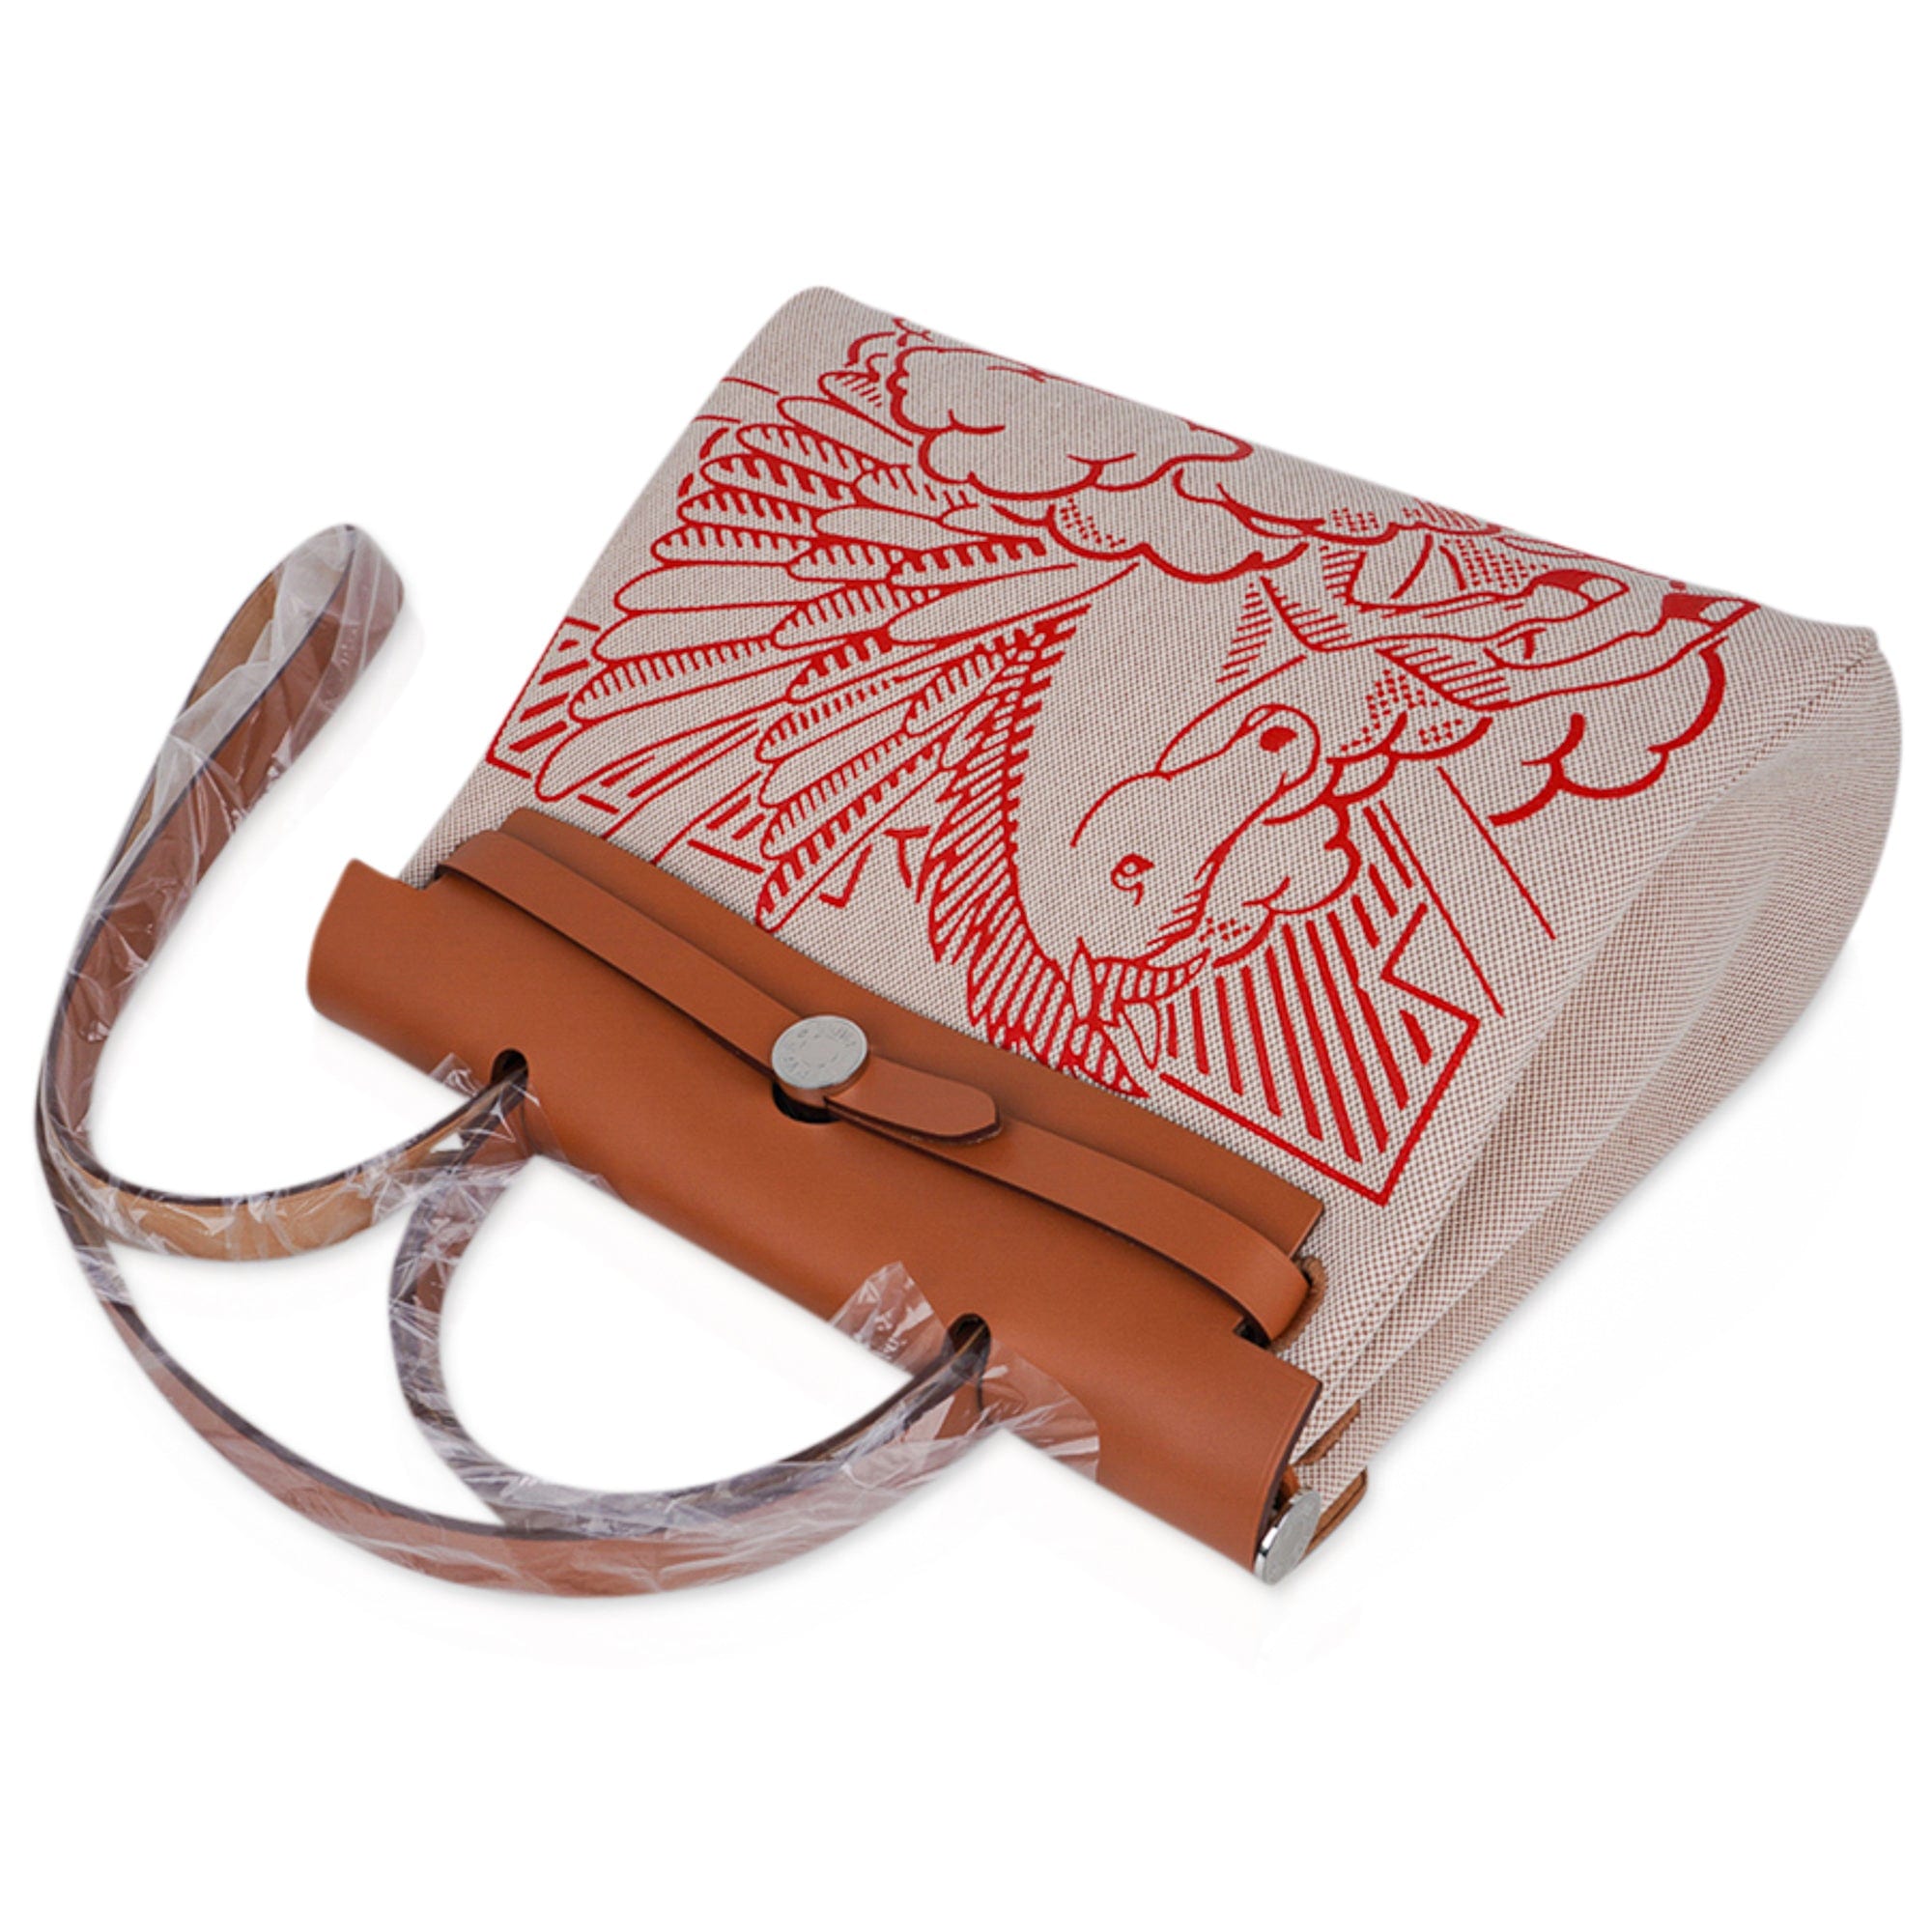 Hermes Herbag Zip Pegase Pop PM 31 Rouge Piment Special Edition